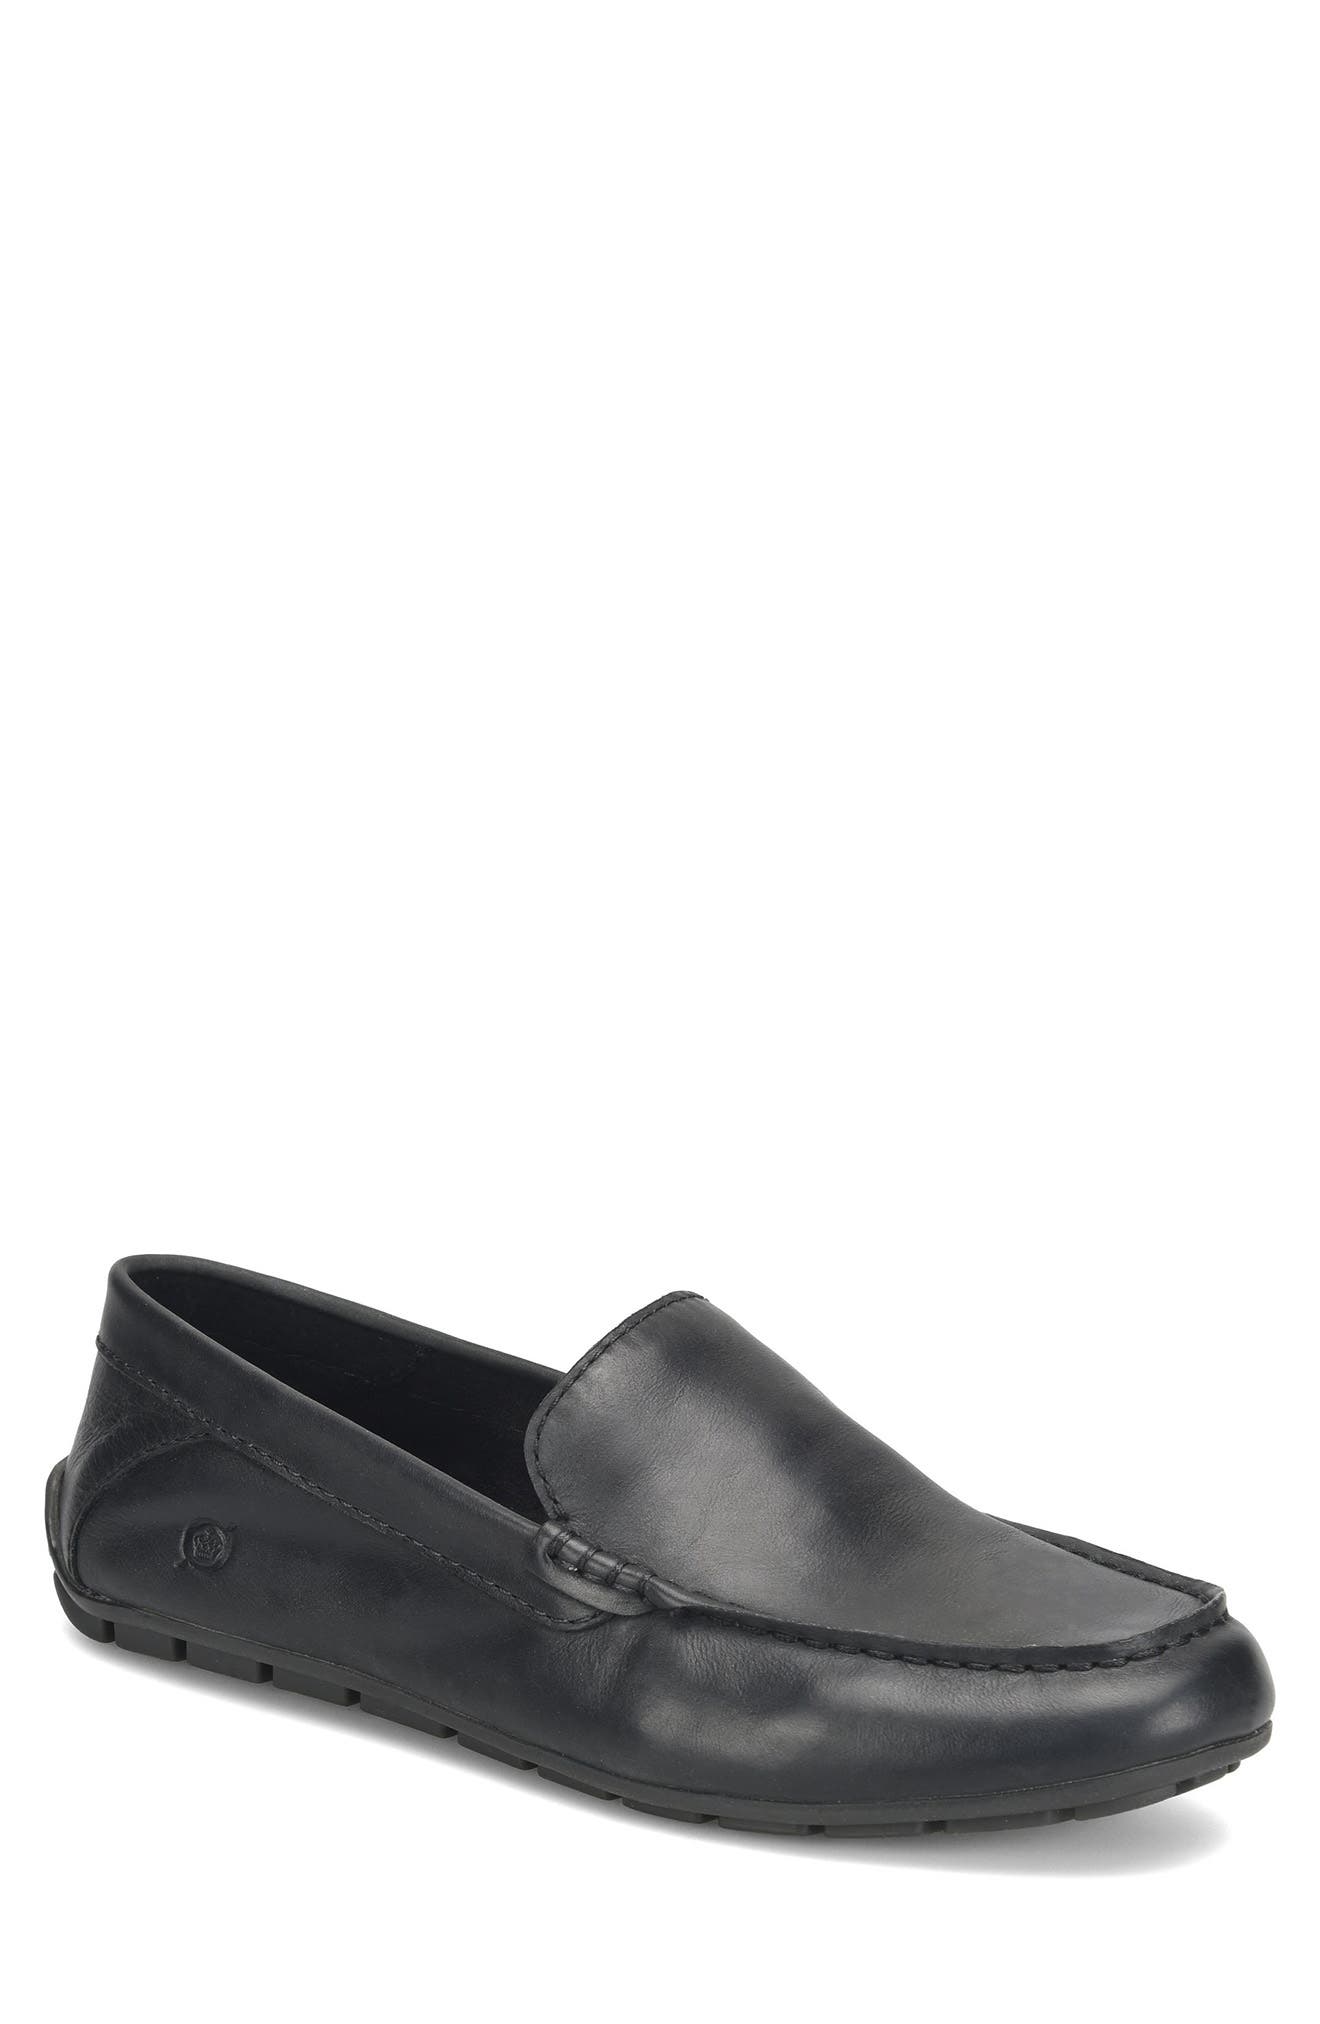 Born Liam Leather Loafer In Black F/g